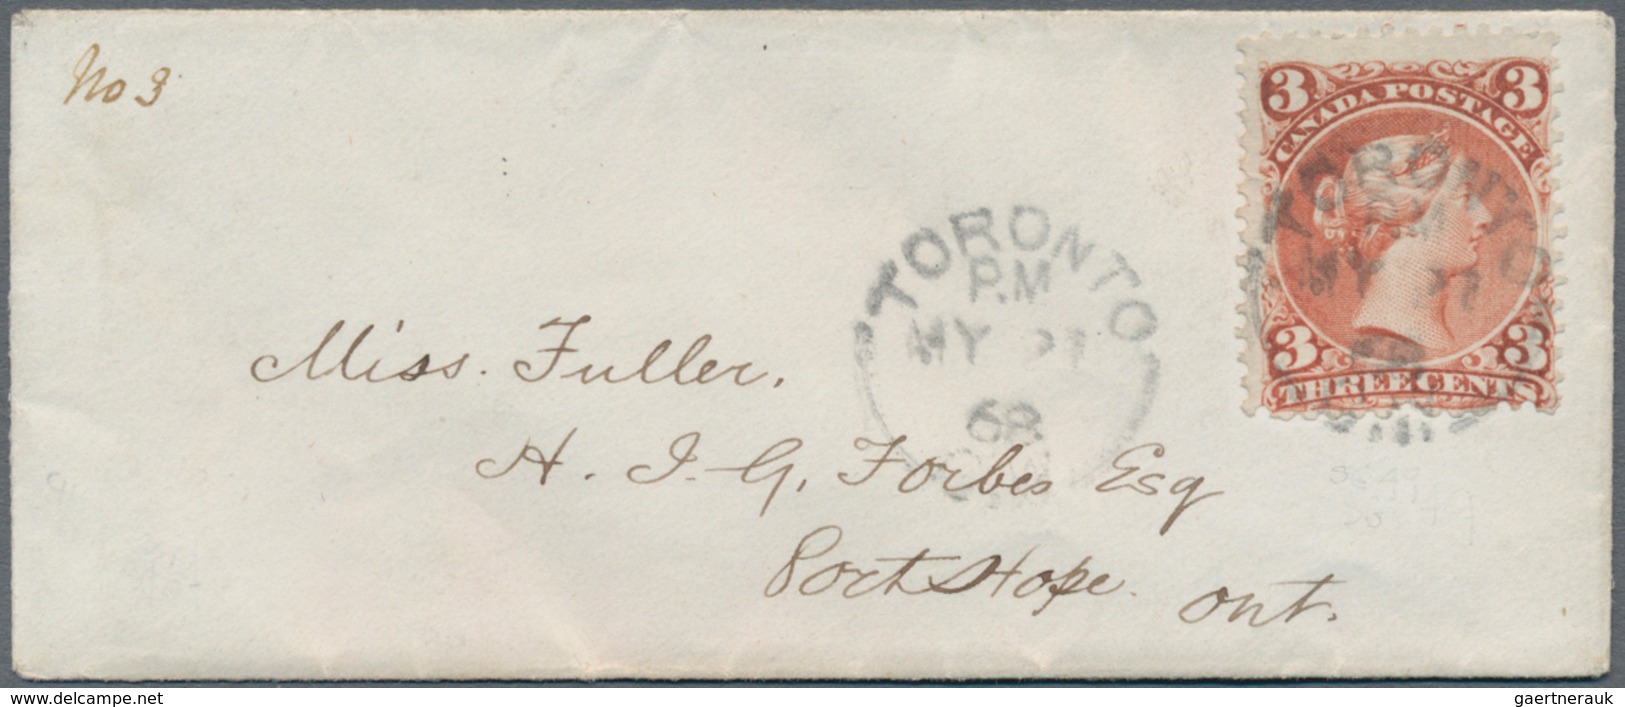 Canada: 1868/69, six very fine covers, each franked with 3 Cent QV large type.